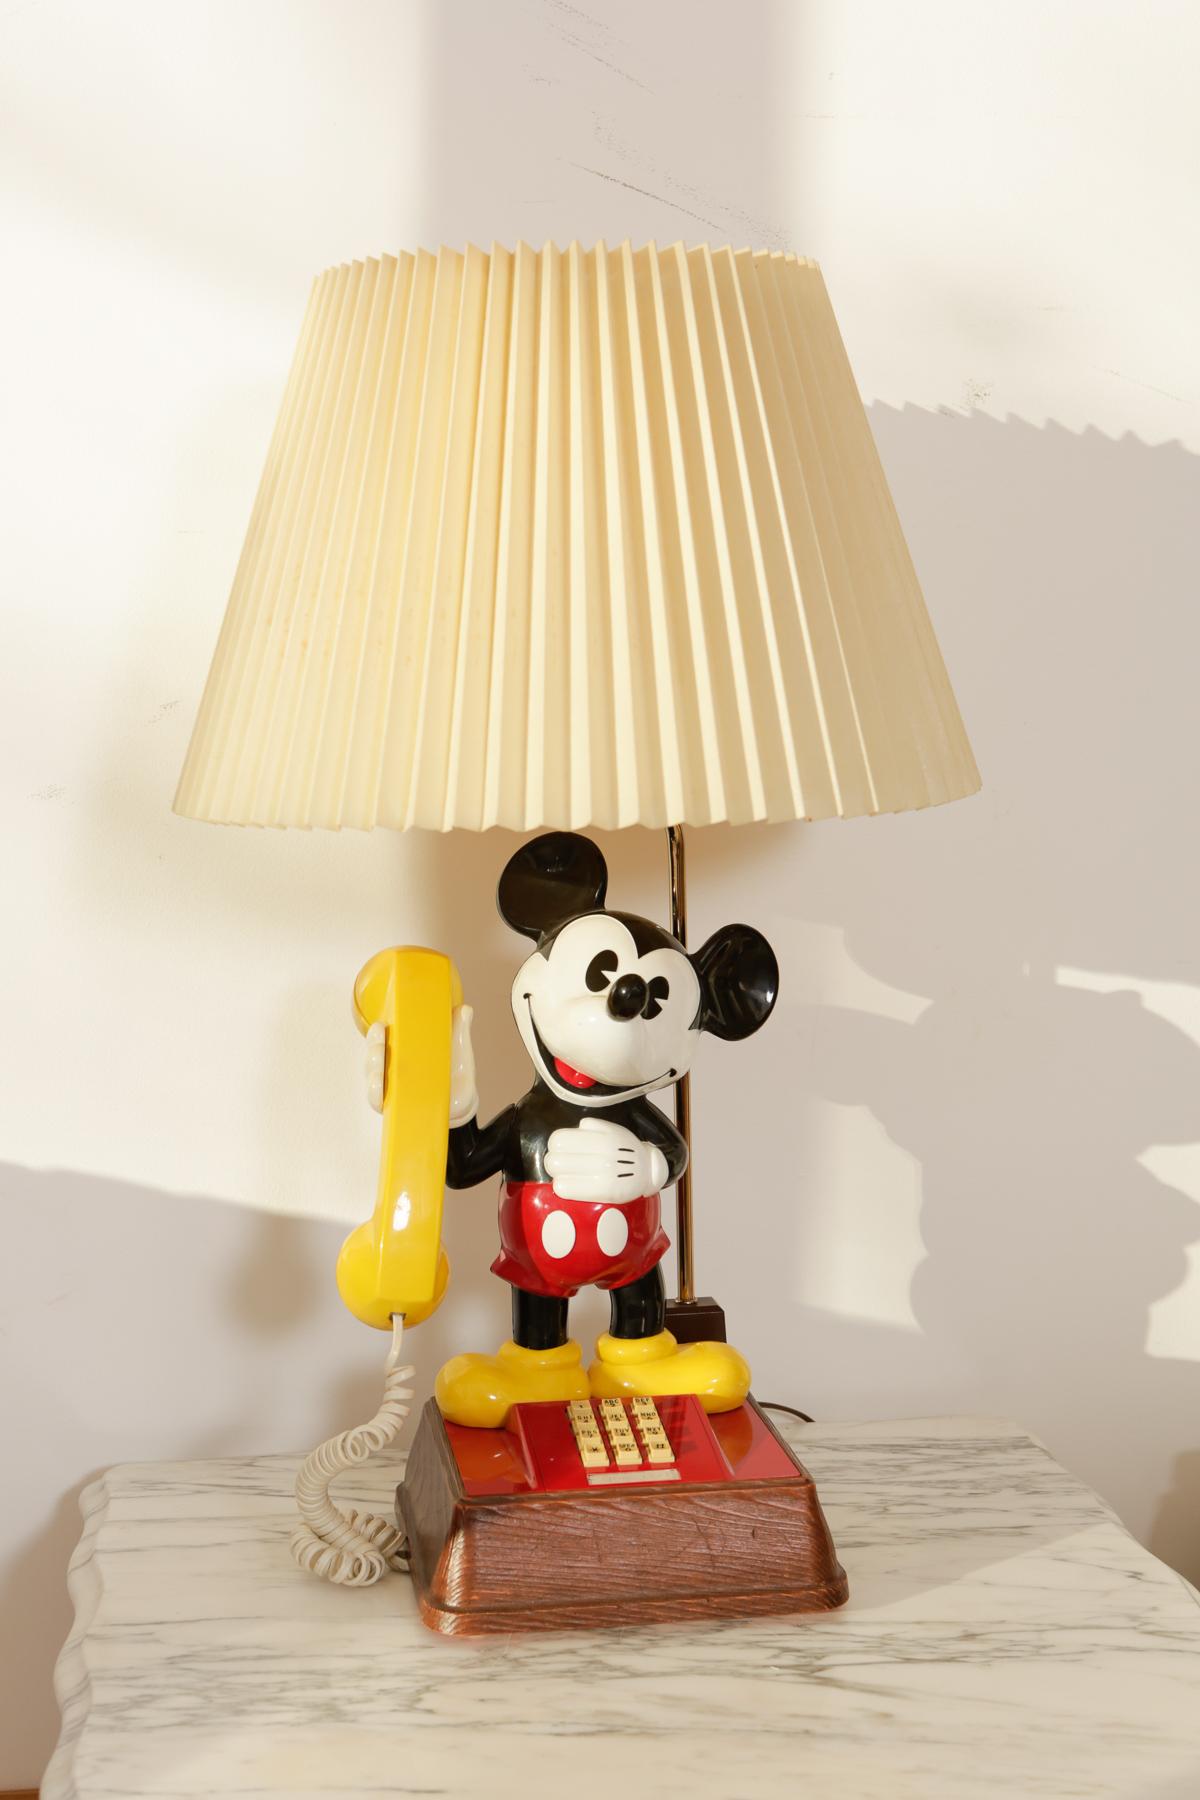 Our 1970s Walt Disney mickey mouse phone lamp is a perfect vintage piece to satisfy your inner child. And did we mention it’s collectable? The phone itself has not been tested, but will likely function if you have landline connection. Lamp is in